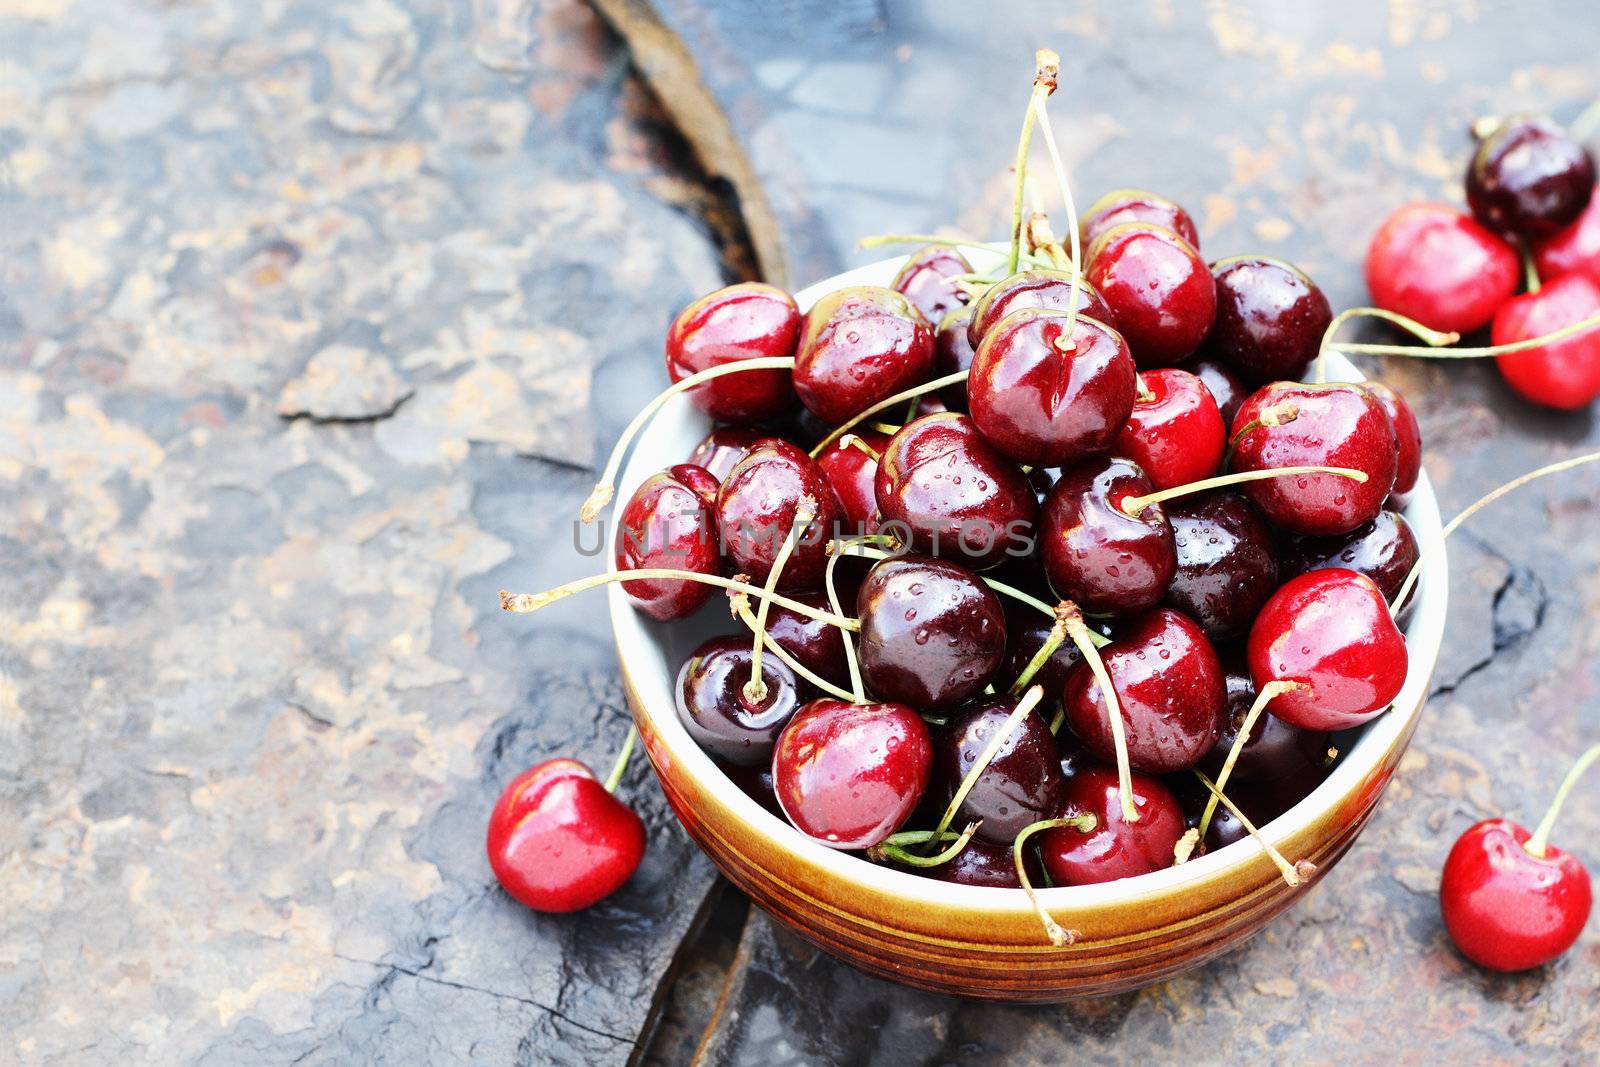 Bowl of black cherries with stems over a rustic background with available copy space.